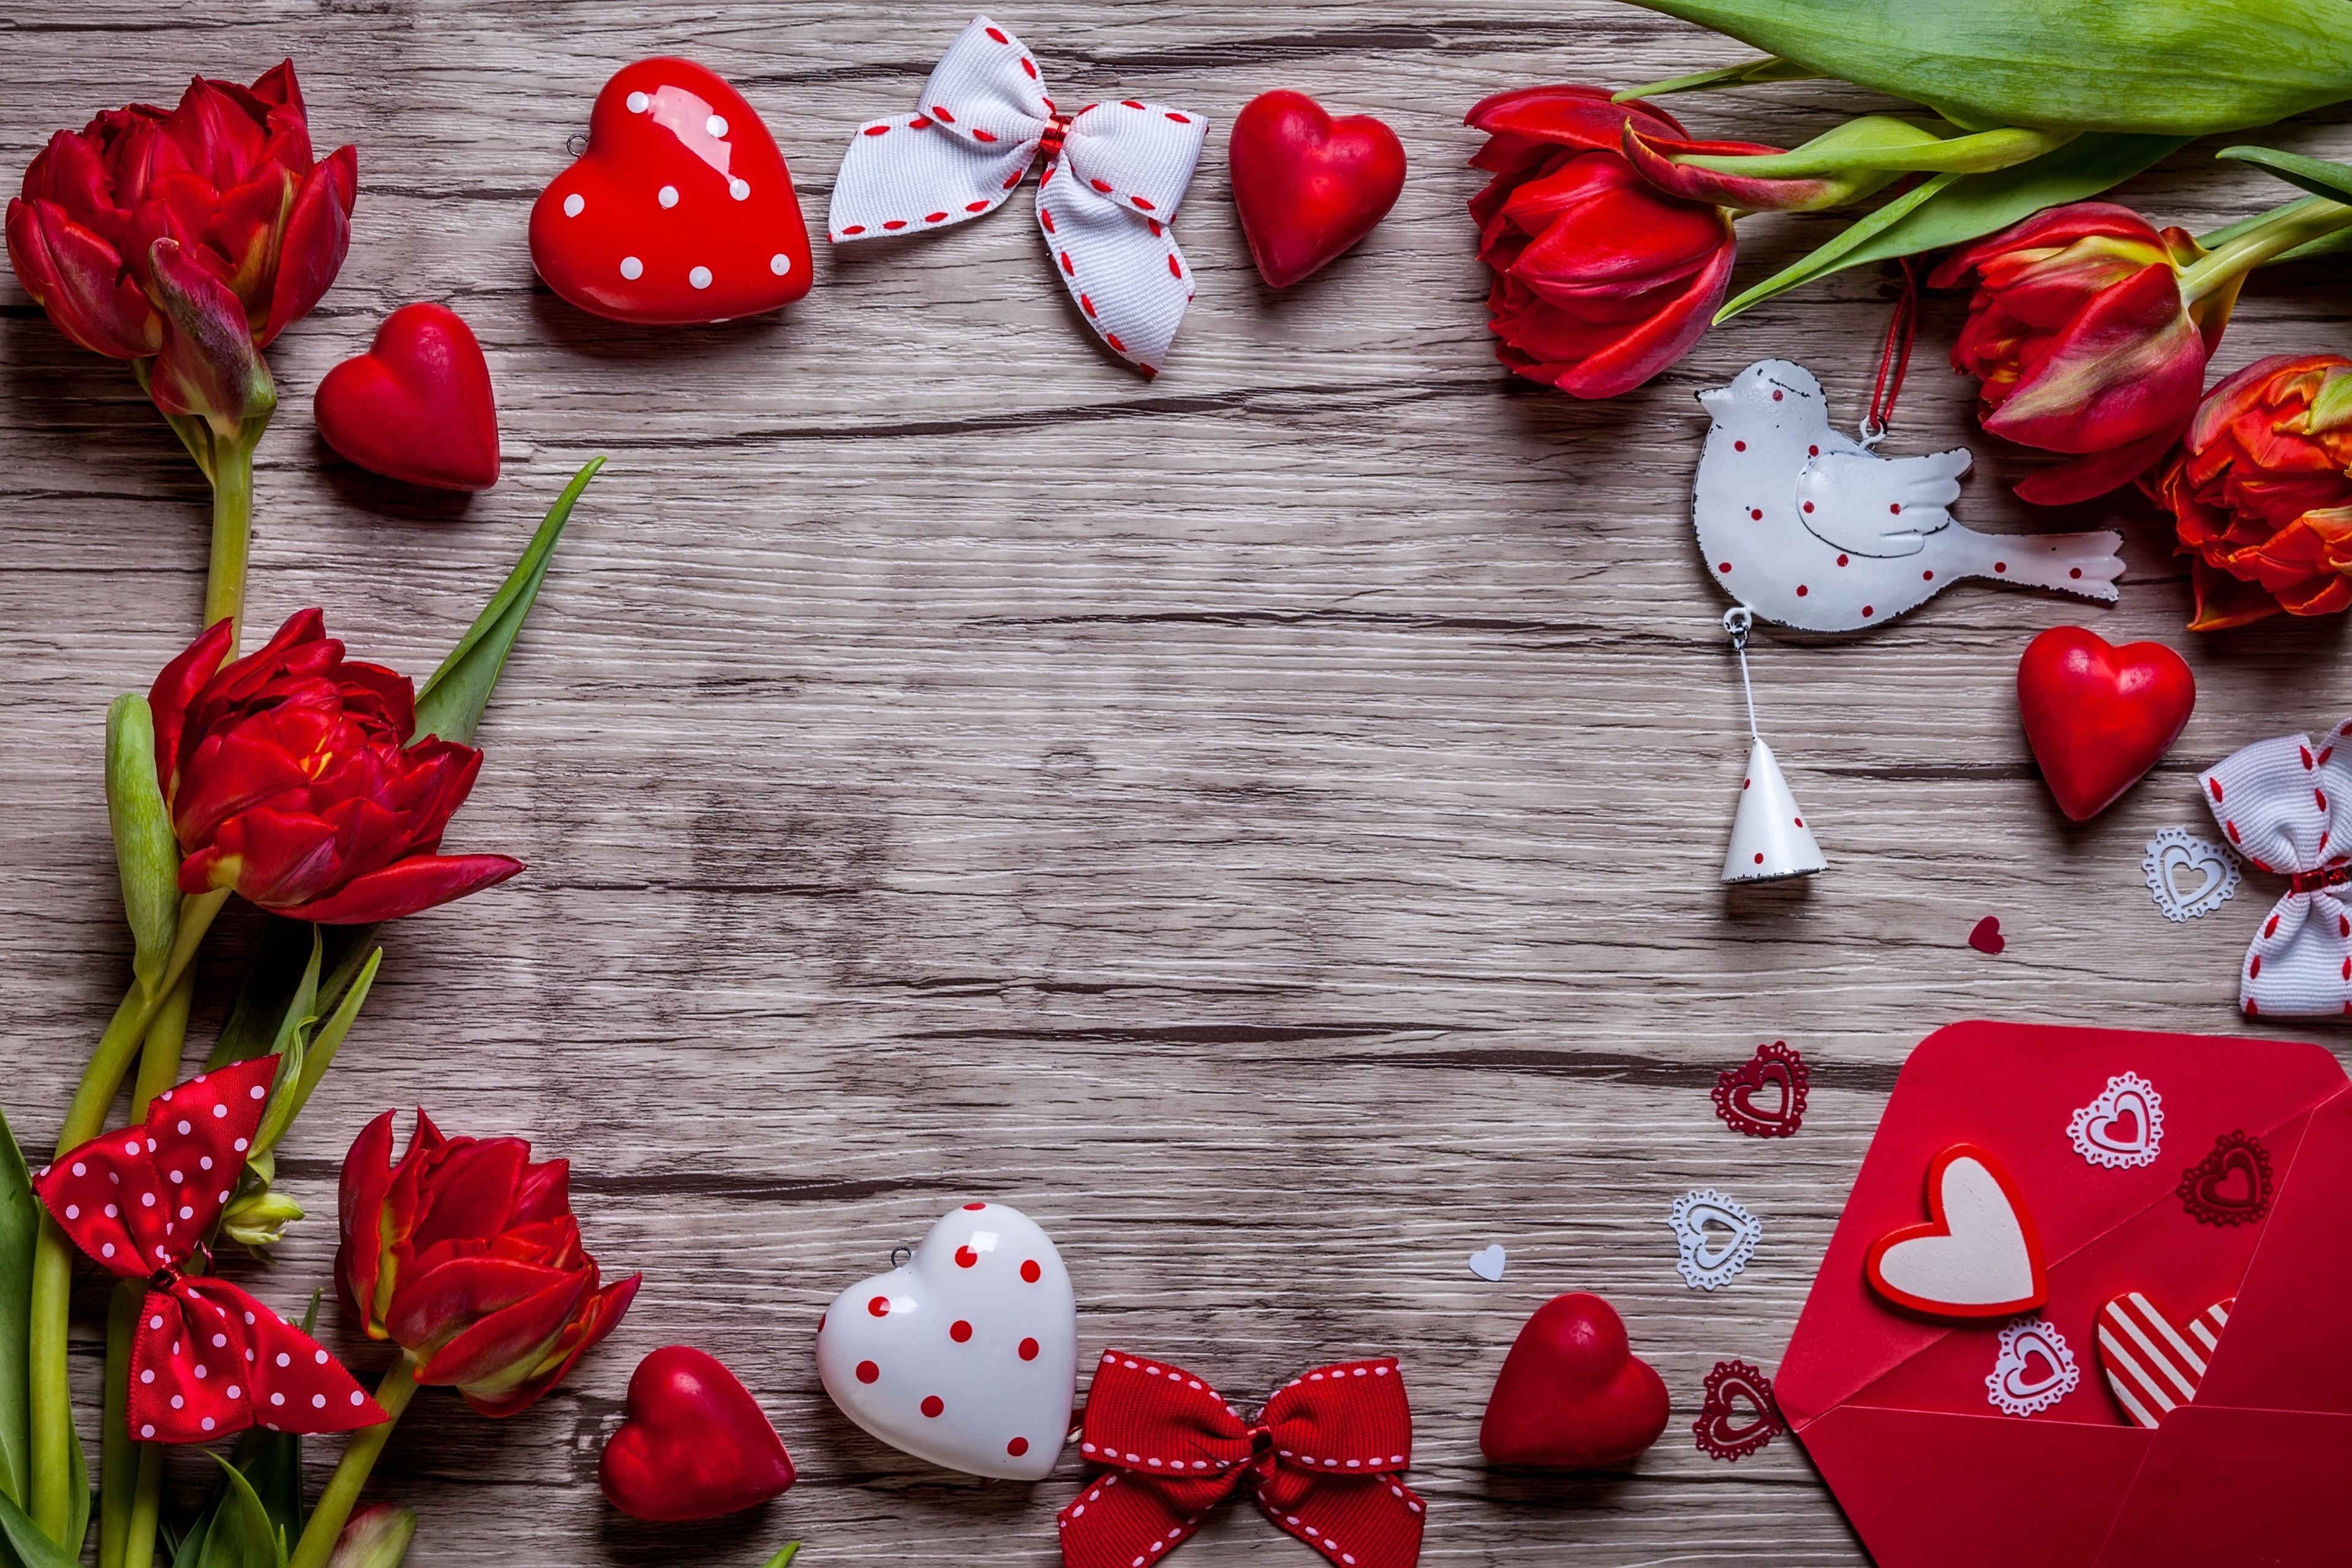 Valentines day k free beautiful wallpaper p k k hd wallpapers backgrounds free download rare gallery